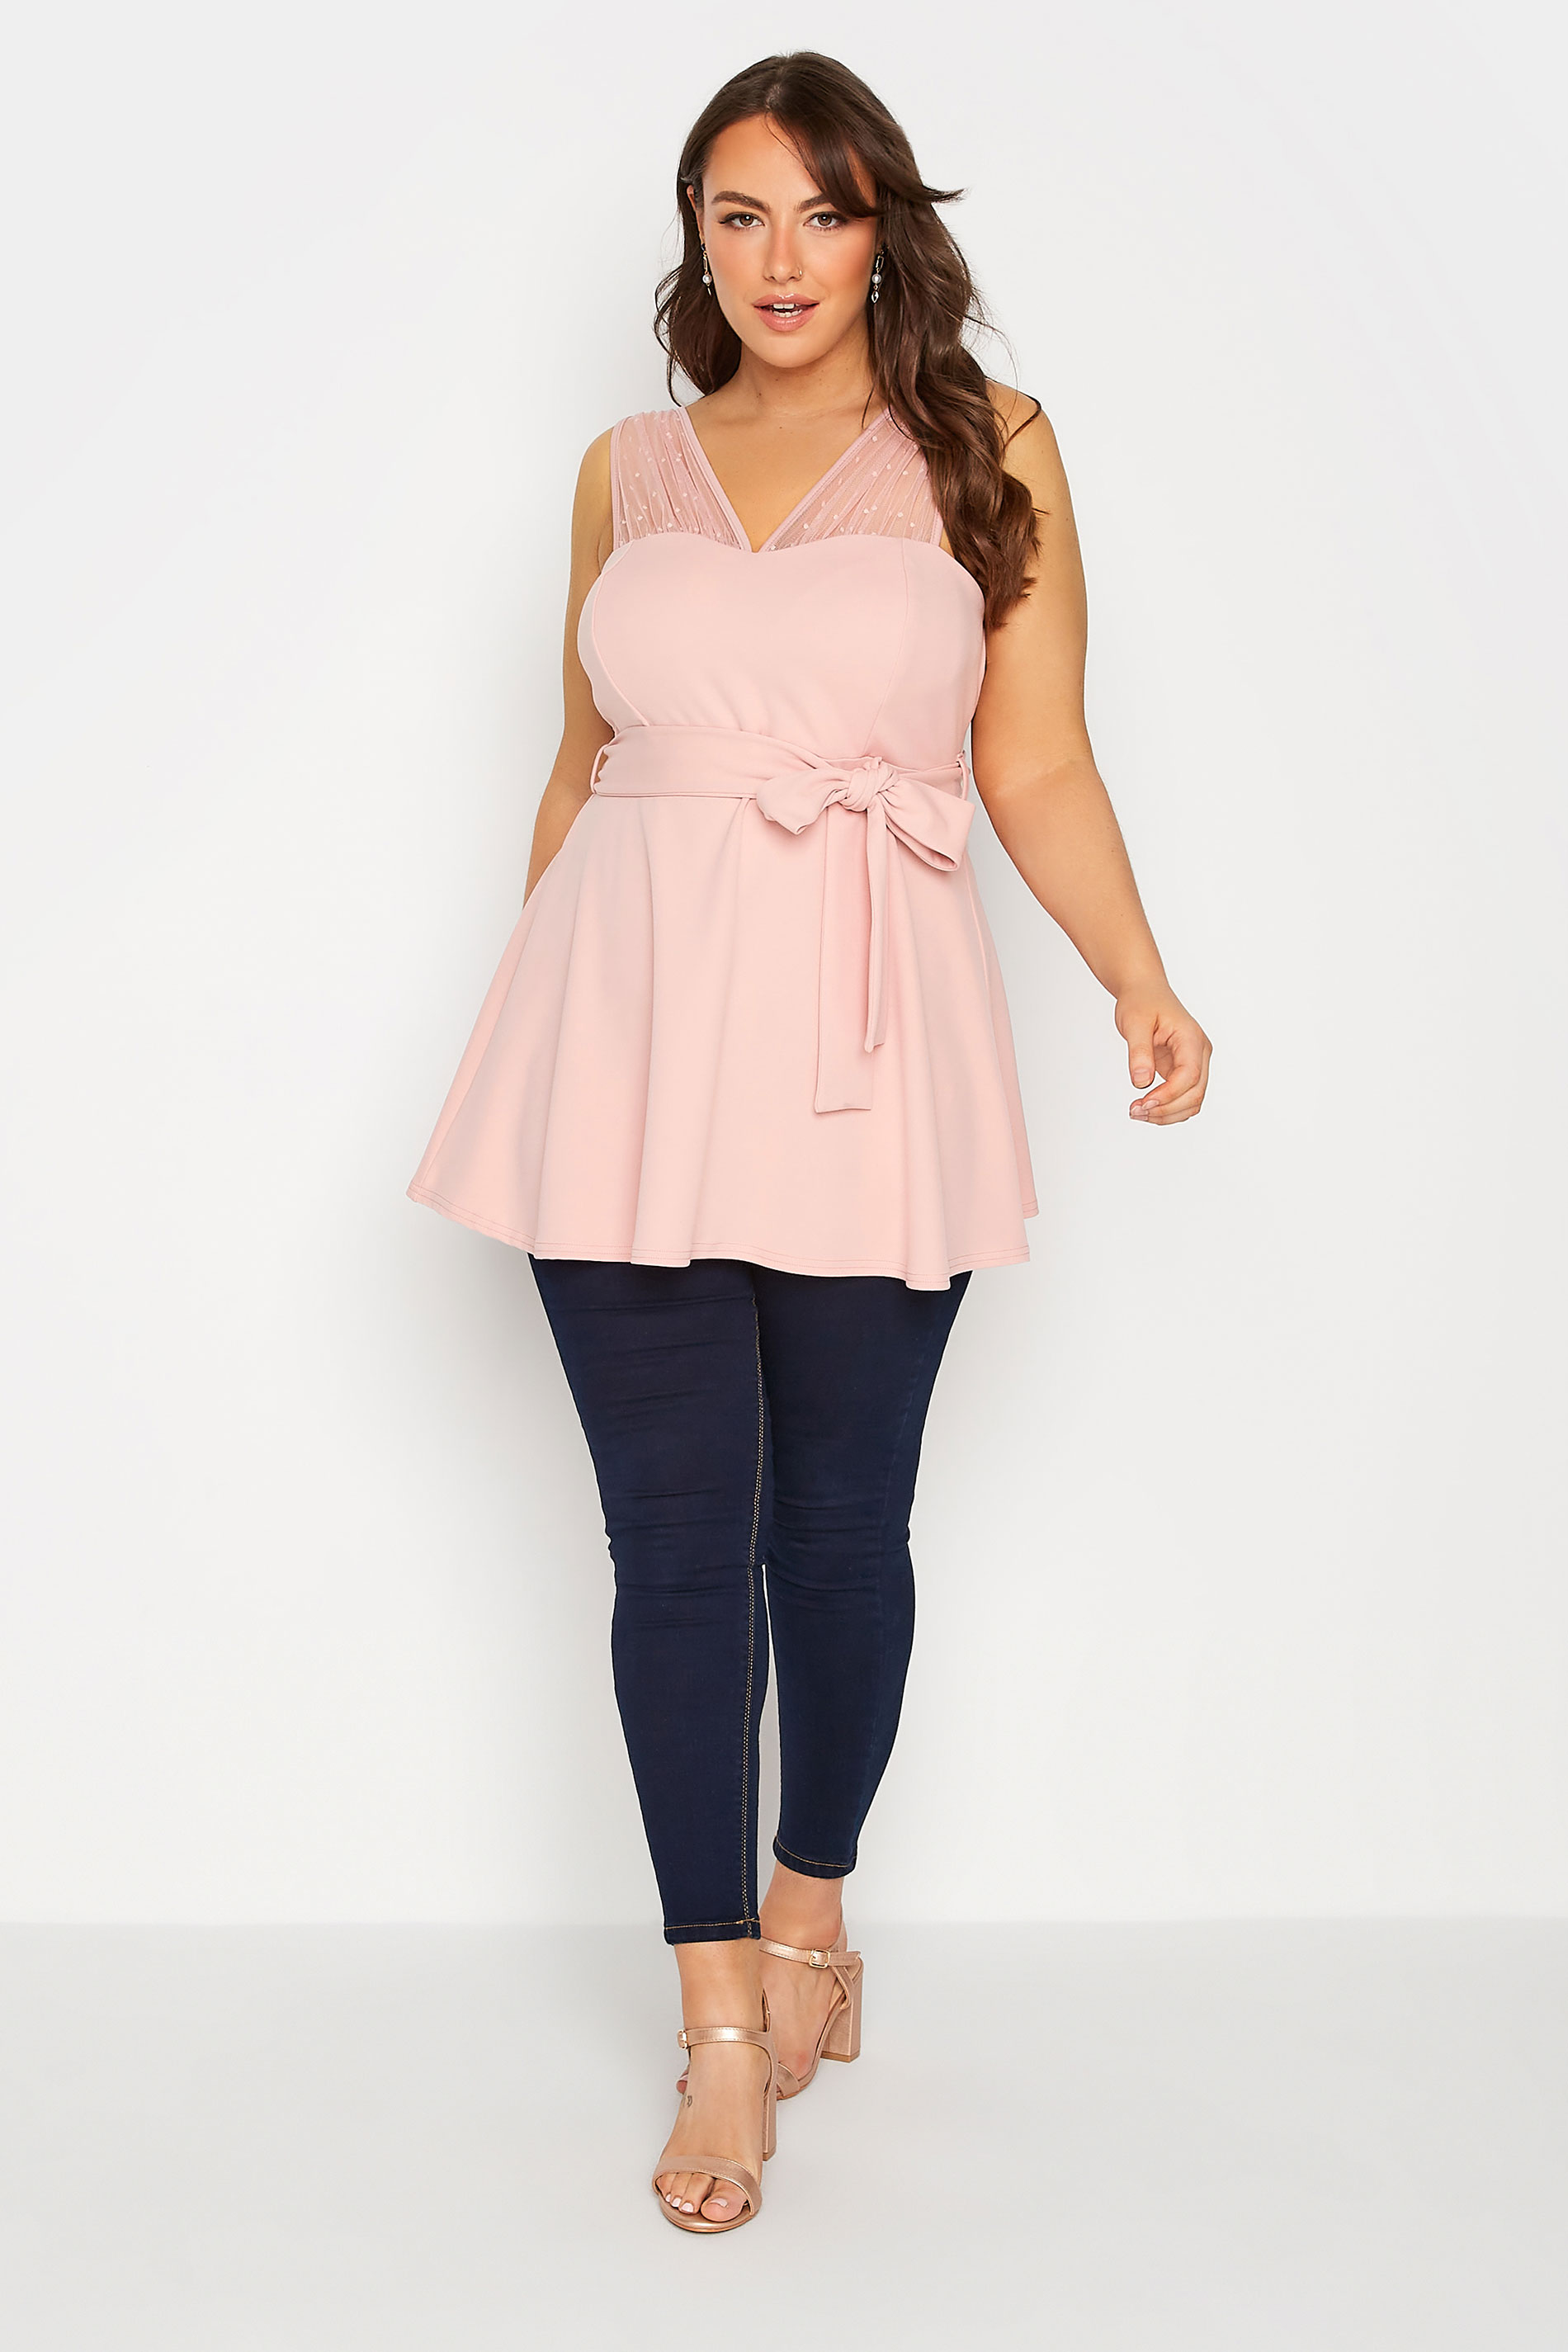 YOURS LONDON Plus Size Pink Mesh Peplum Top | Yours Clothing  2